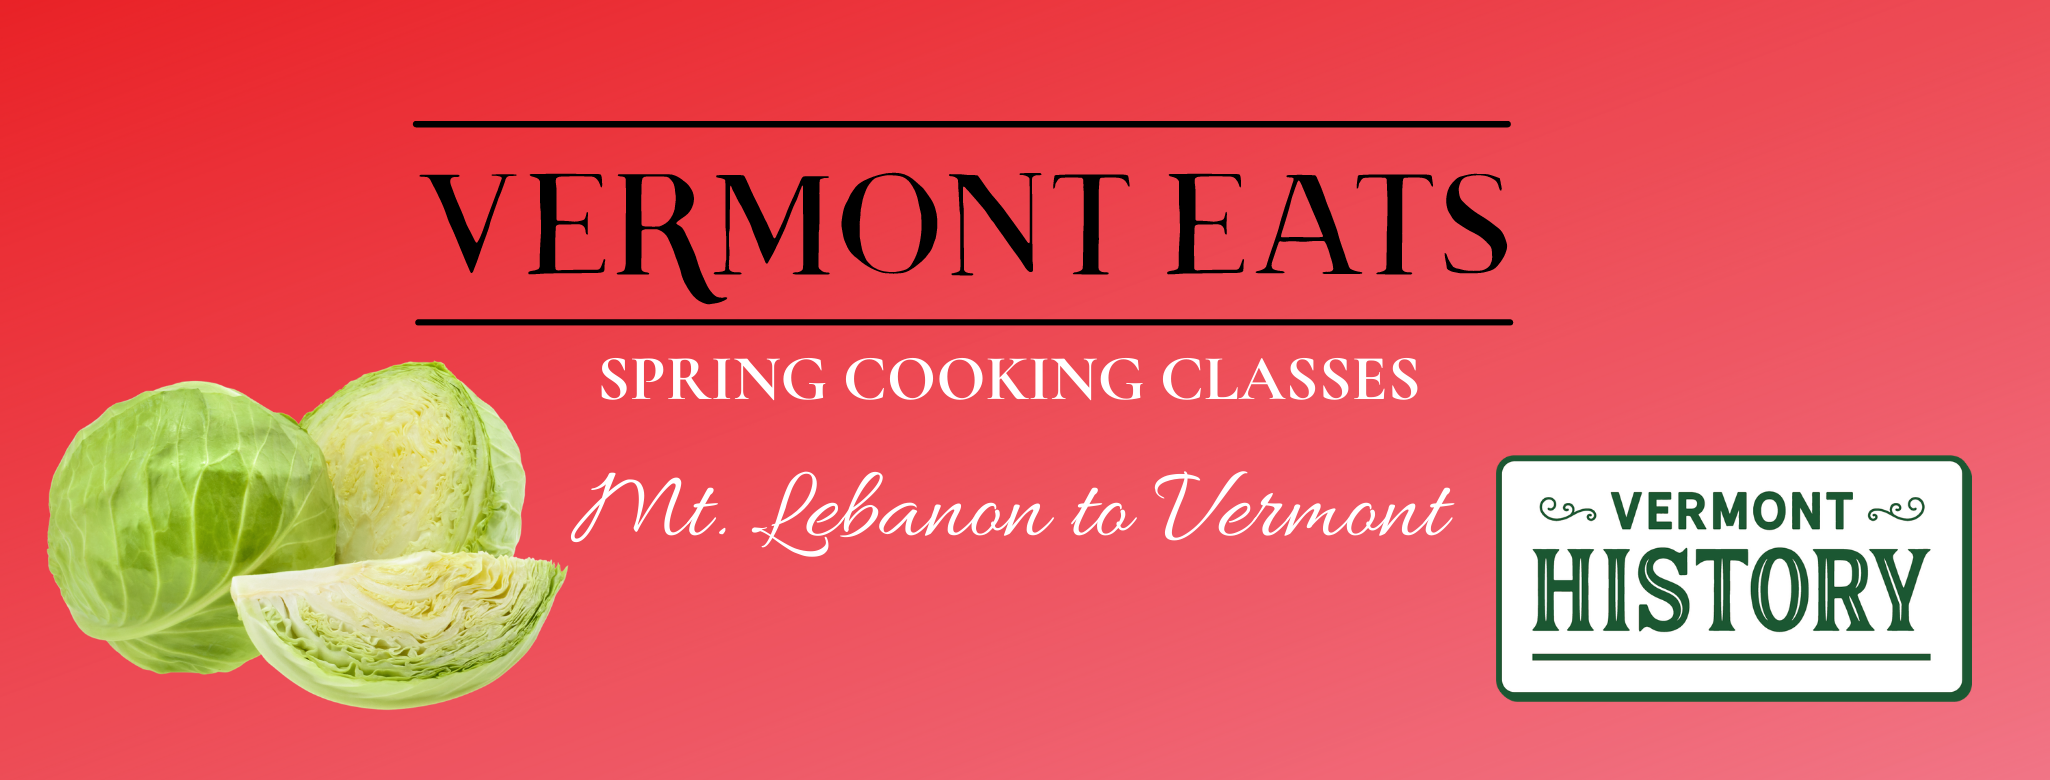 Vermont Eats Spring Cooking Classes. Mt. Lebanon to Vermont.